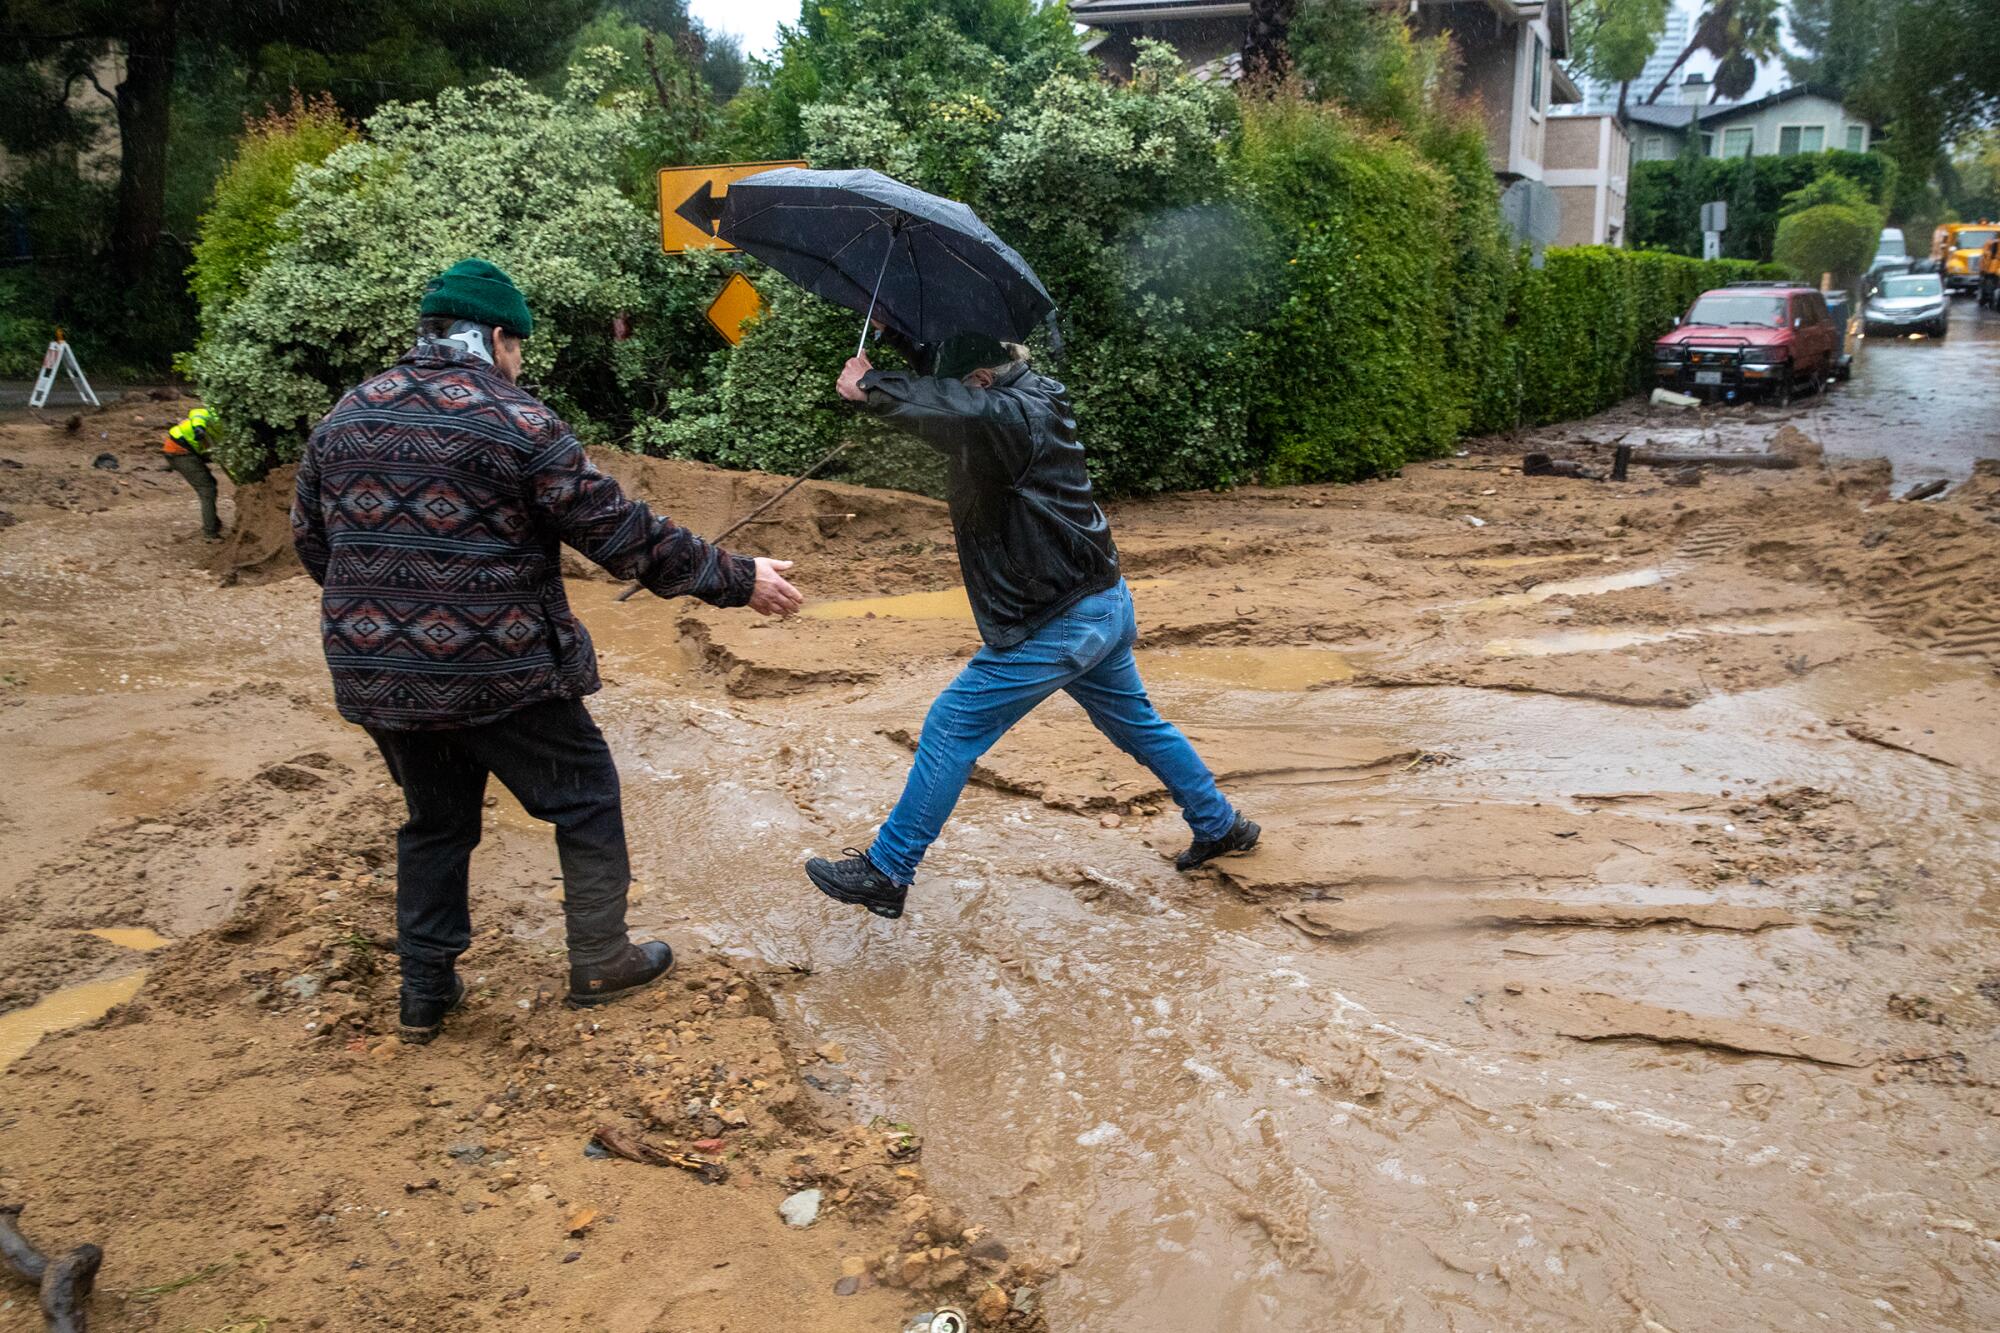 Bud Tate, 60, left, gives a hand to Anthony Ivancich, 80, jumping over flooded street in heavy rain and mudslide